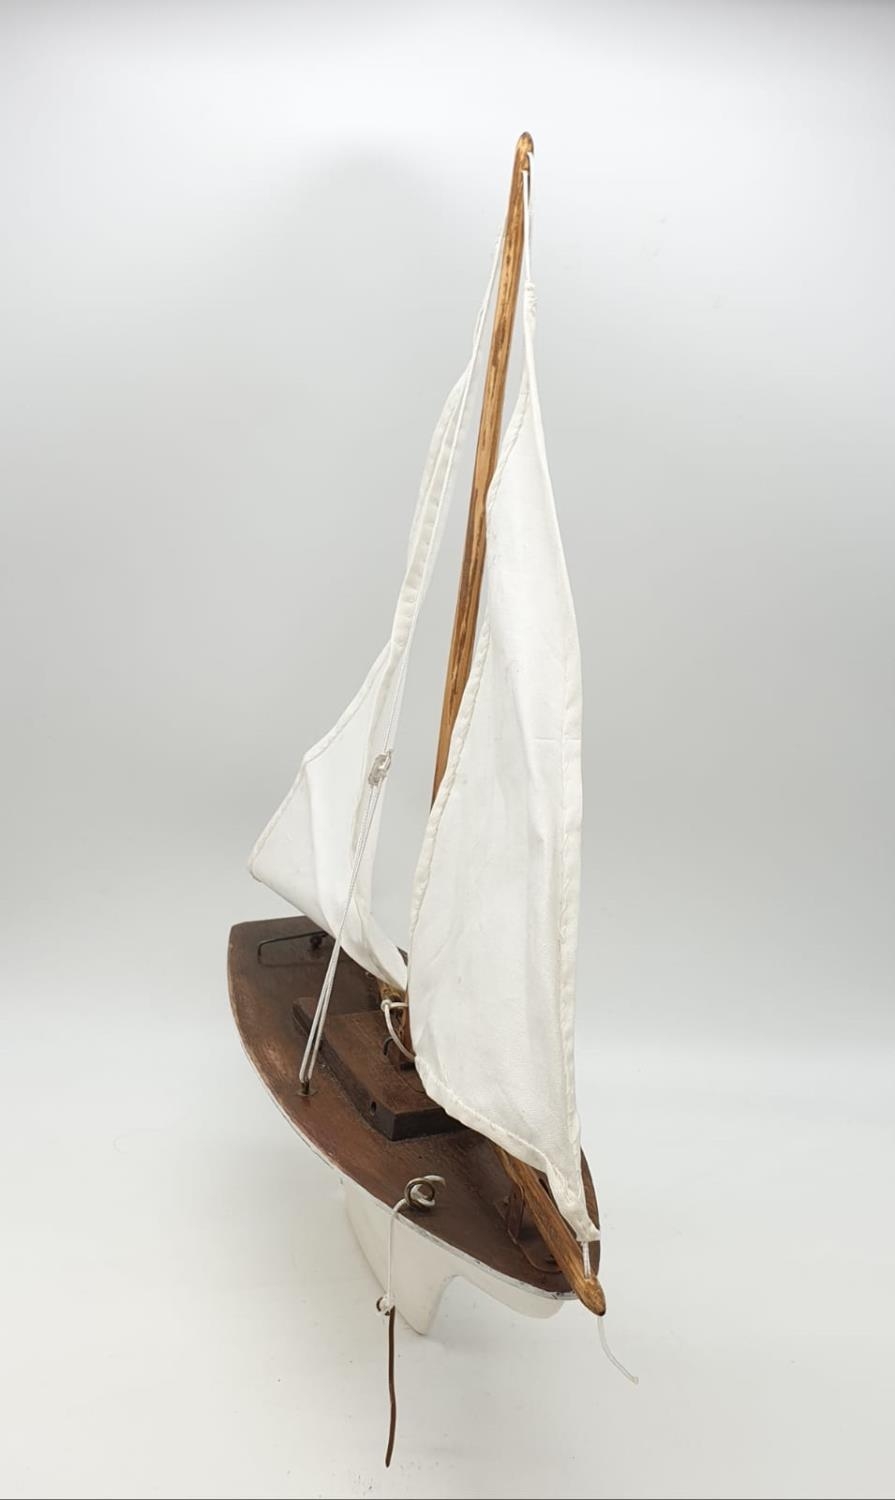 Model sailing boat with 2 sails, 40 x 48cm approx - Image 3 of 3